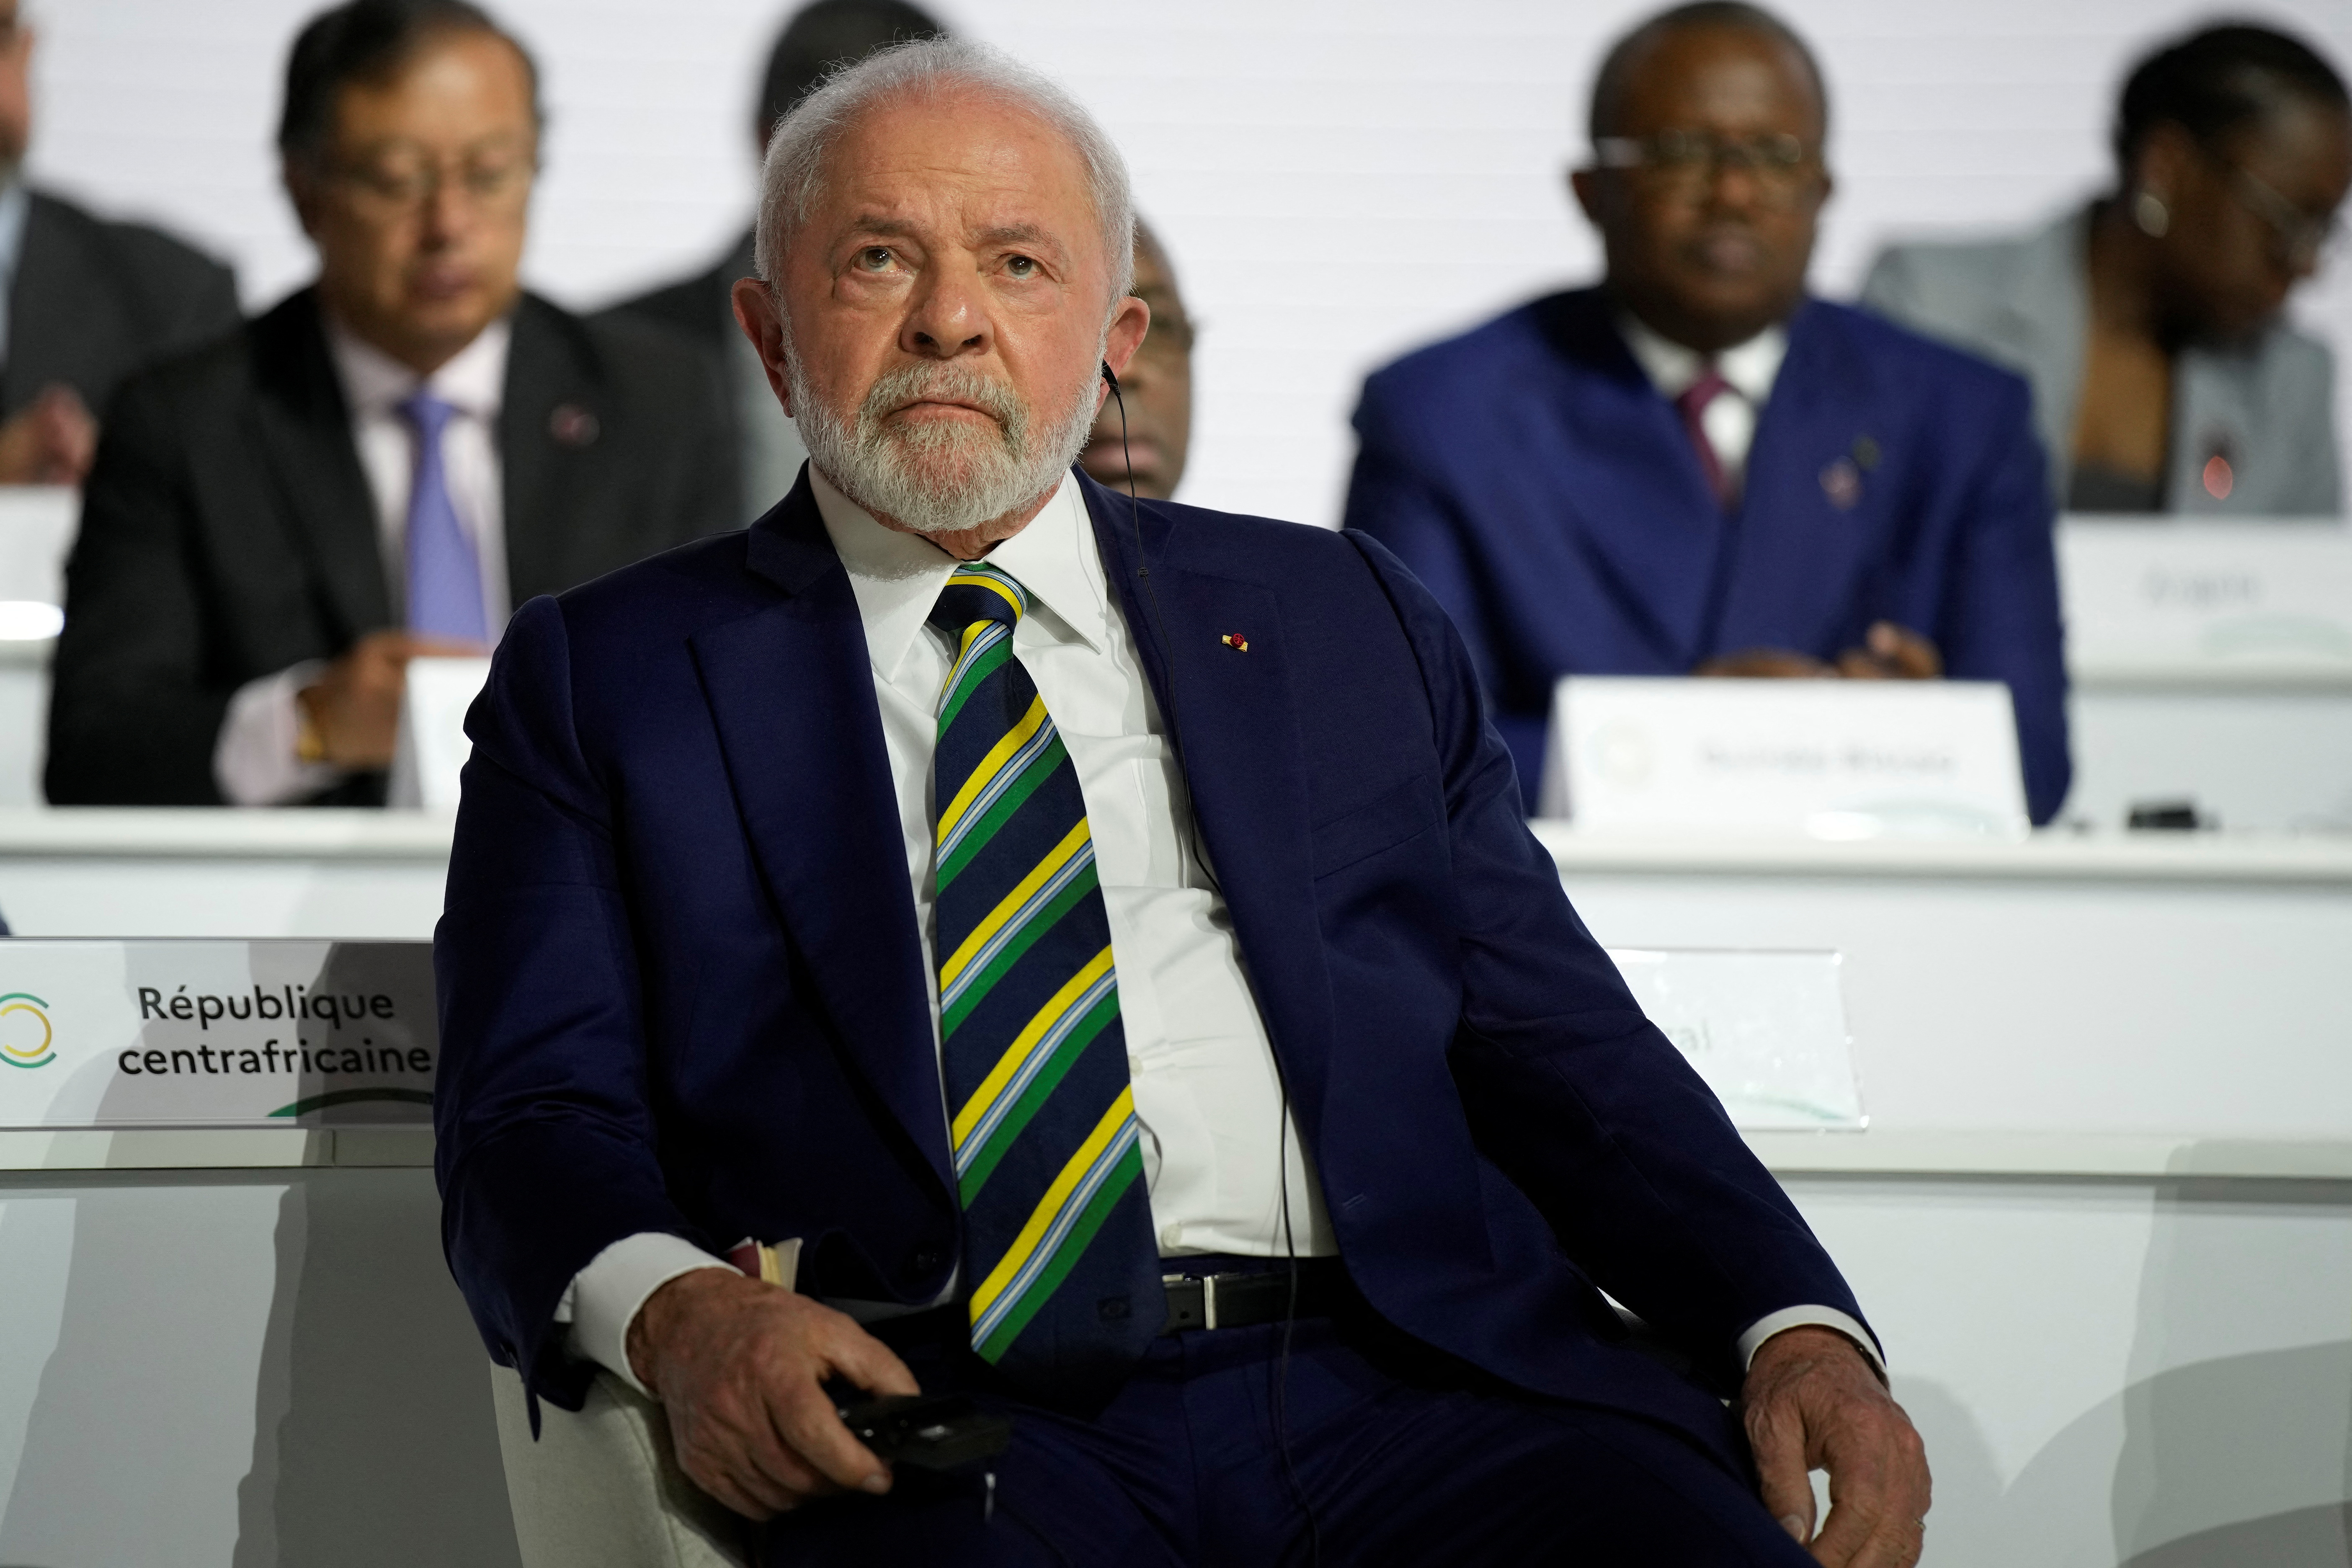 Brazil: US dollar goes up on Lula's first working day — MercoPress